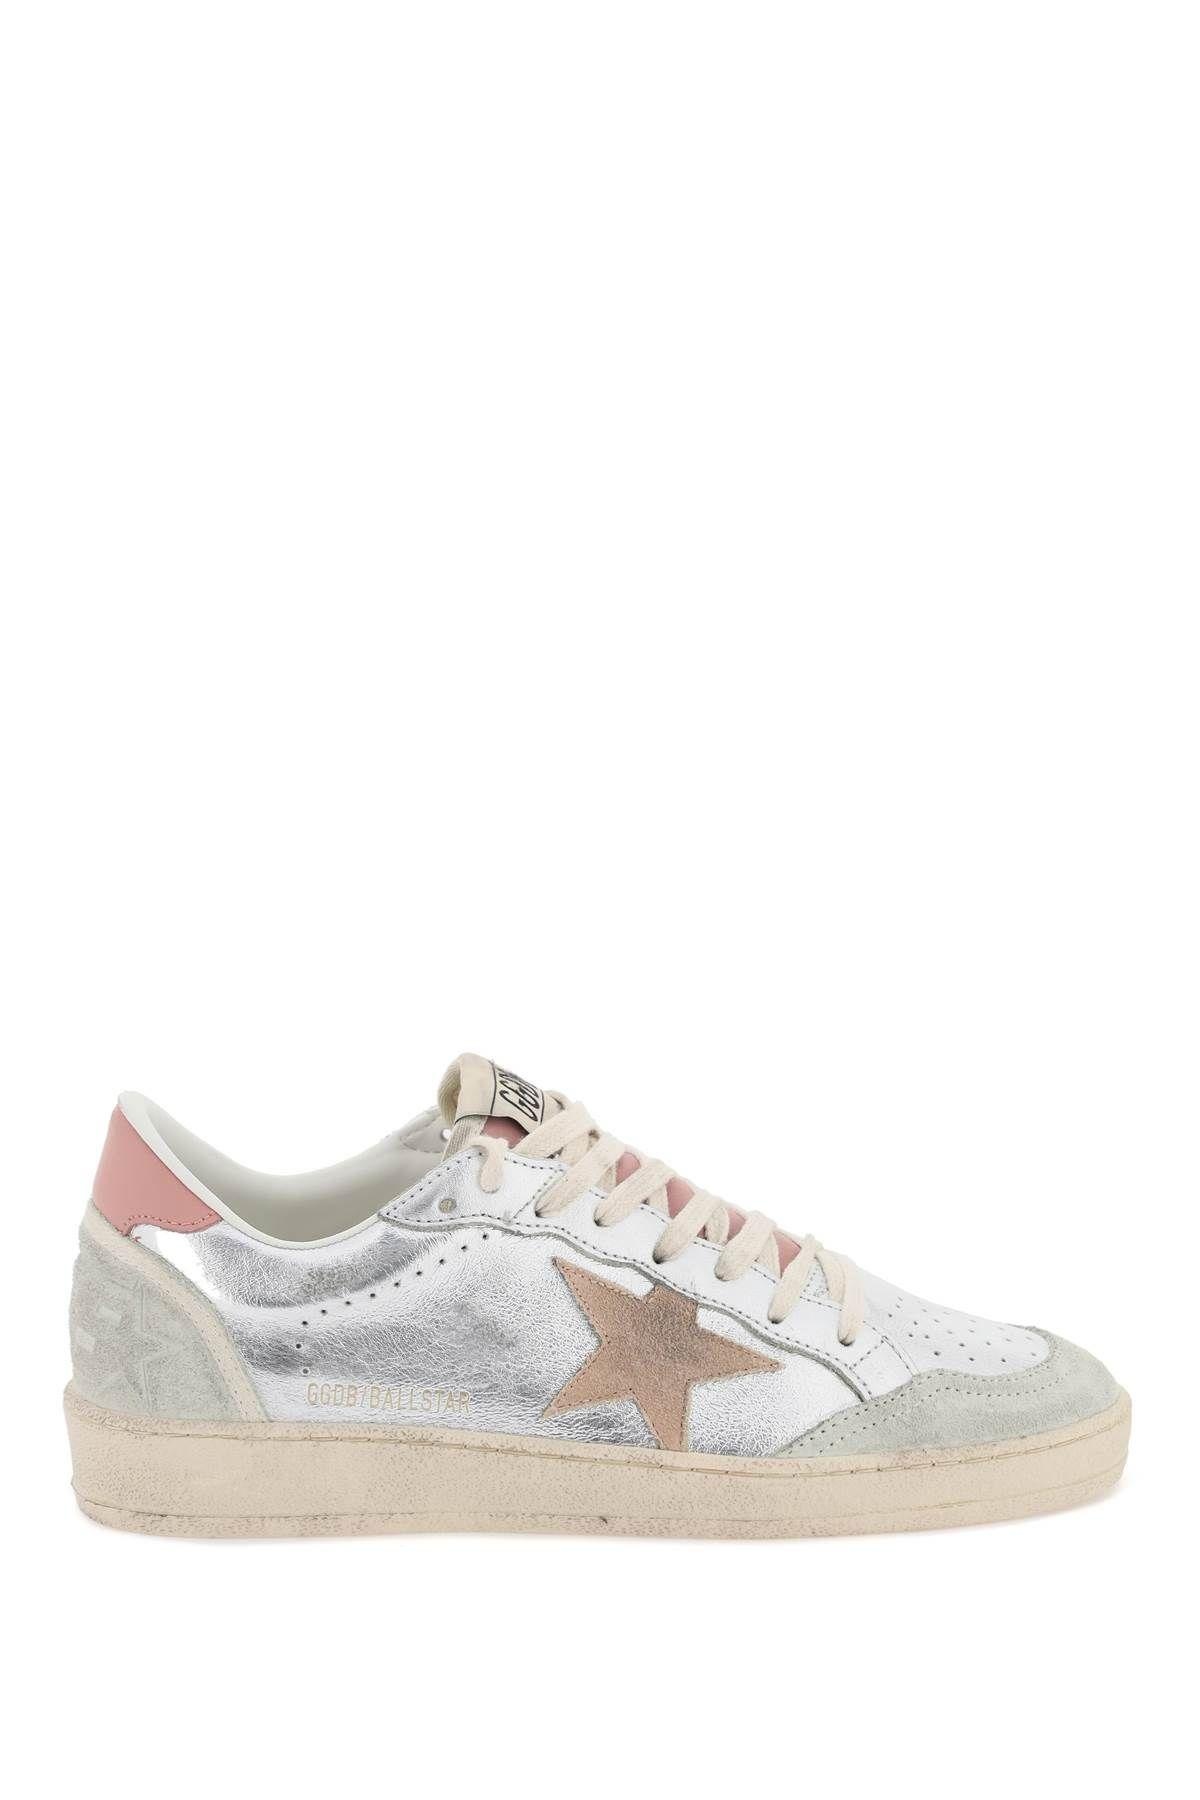 Laminated leather Ball Star sneakers Golden Goose - 1